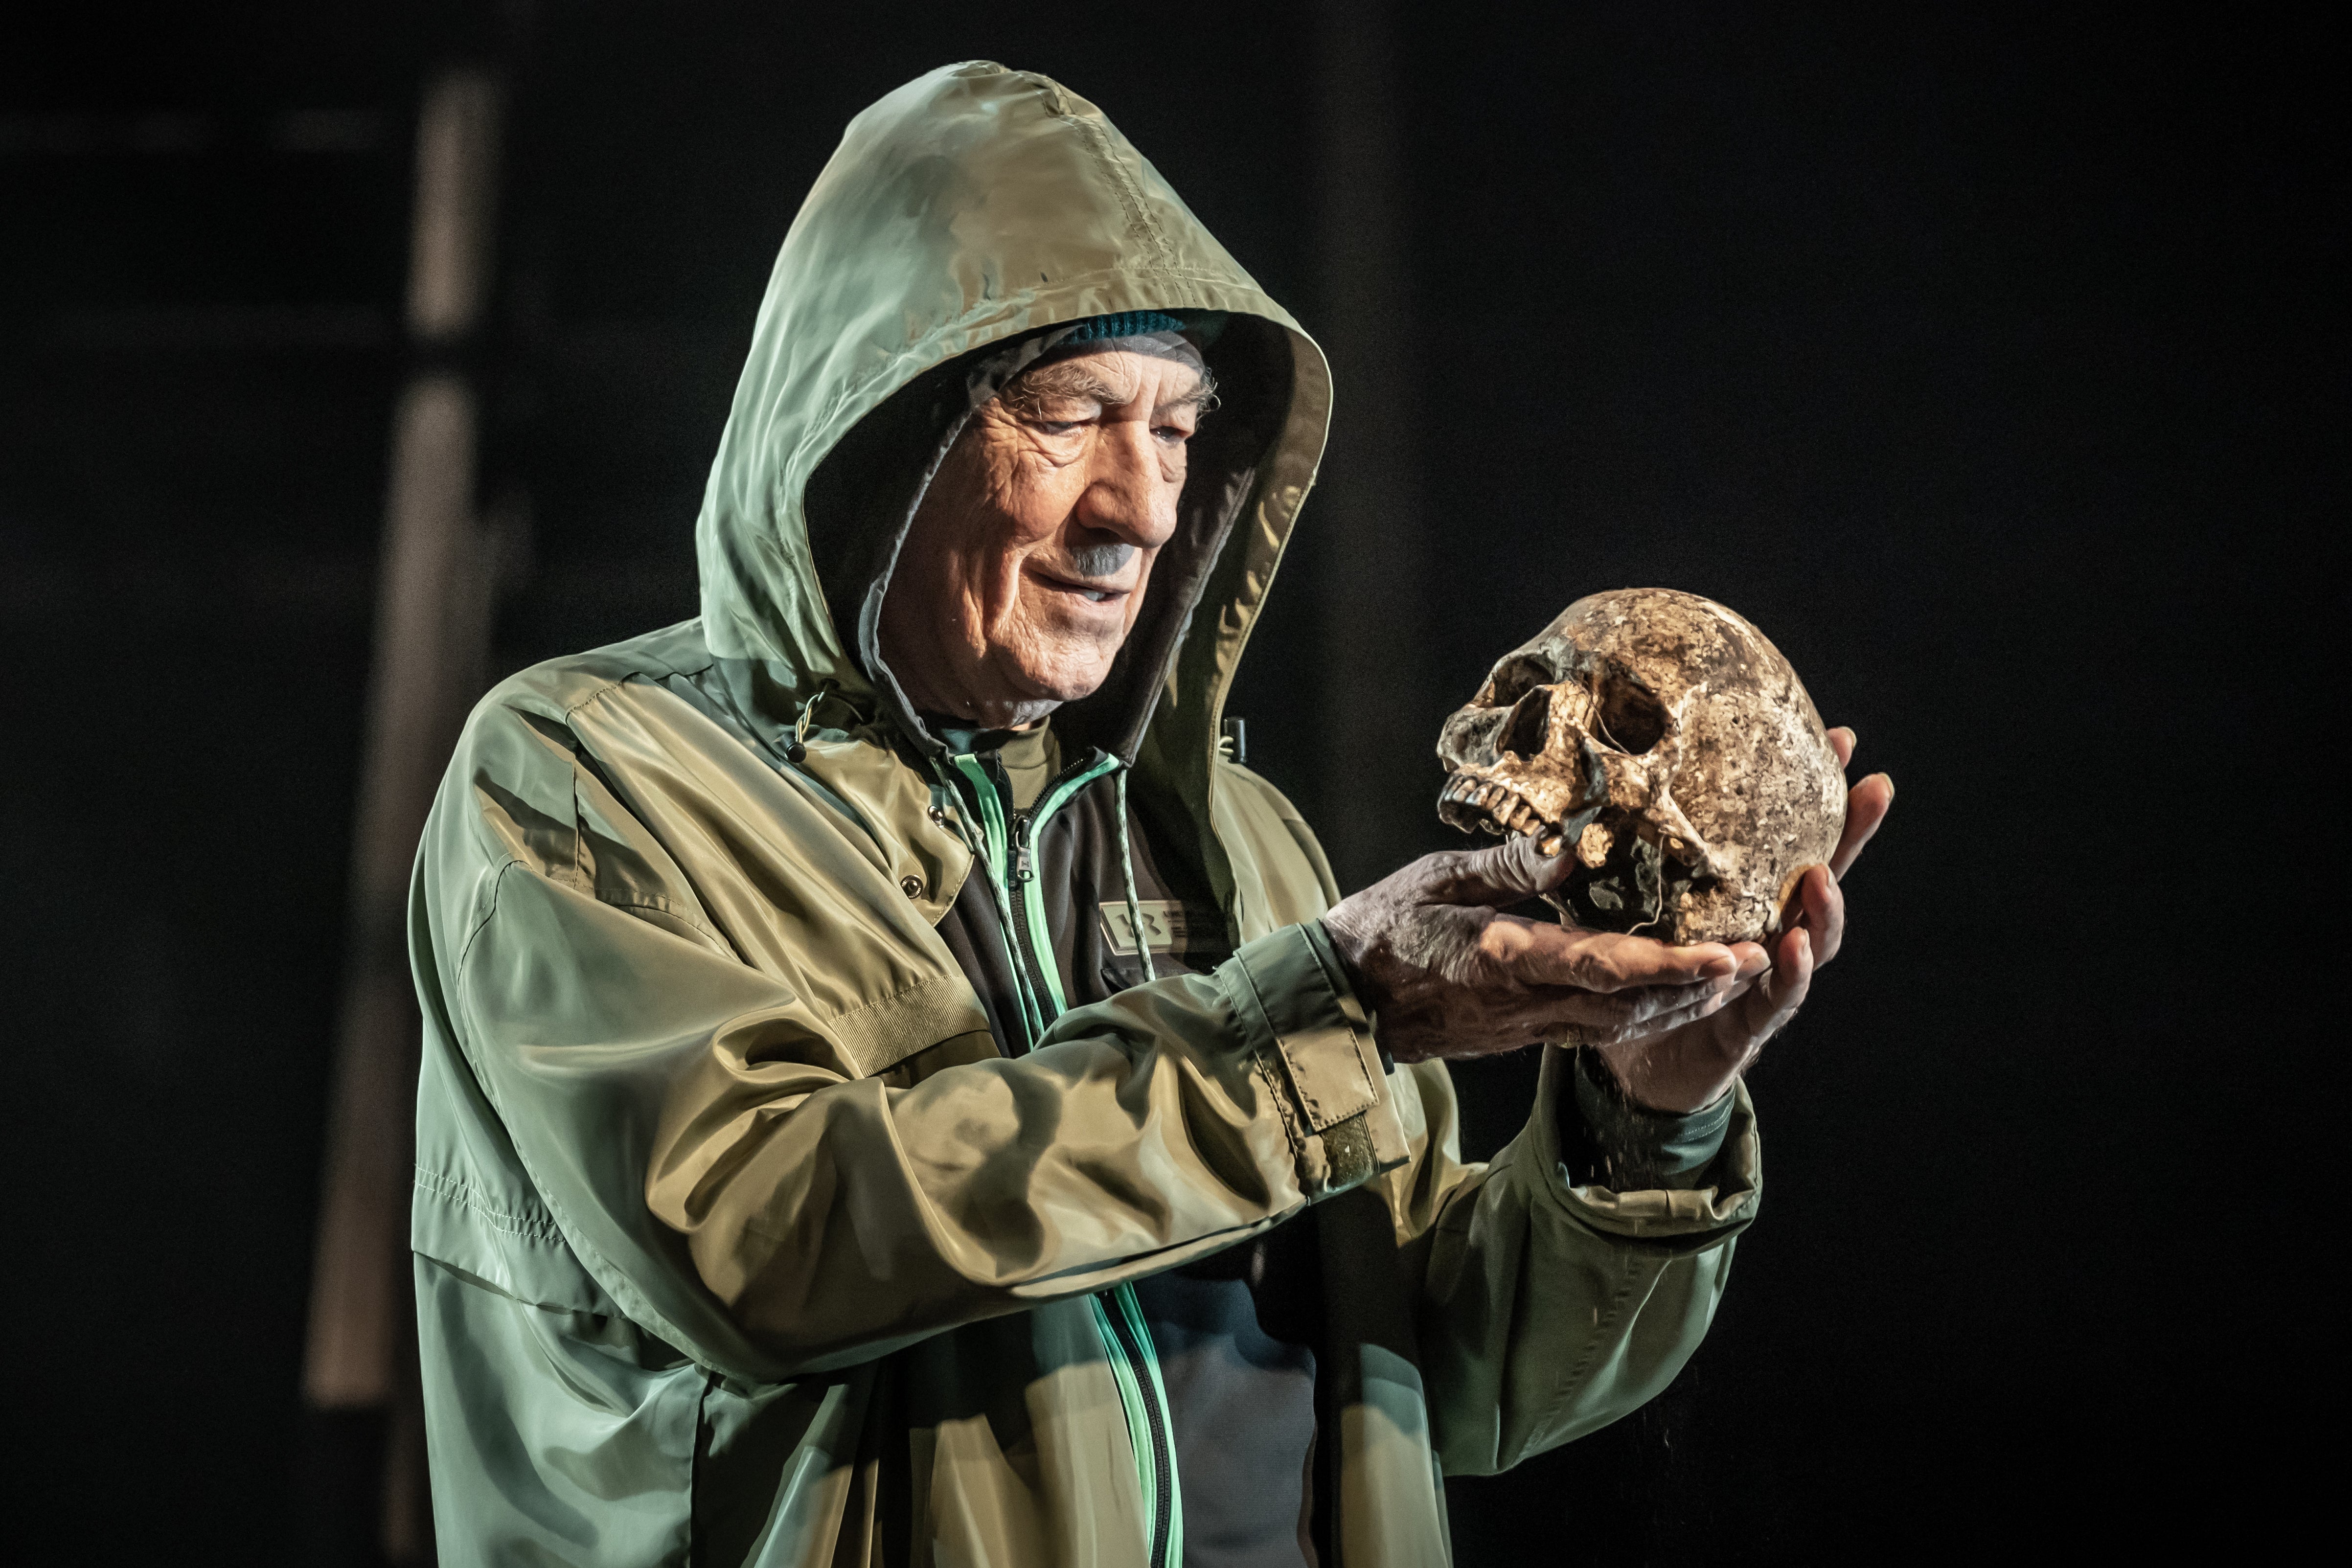 Ian McKellen as Hamlet, 50 years after he first played the prince